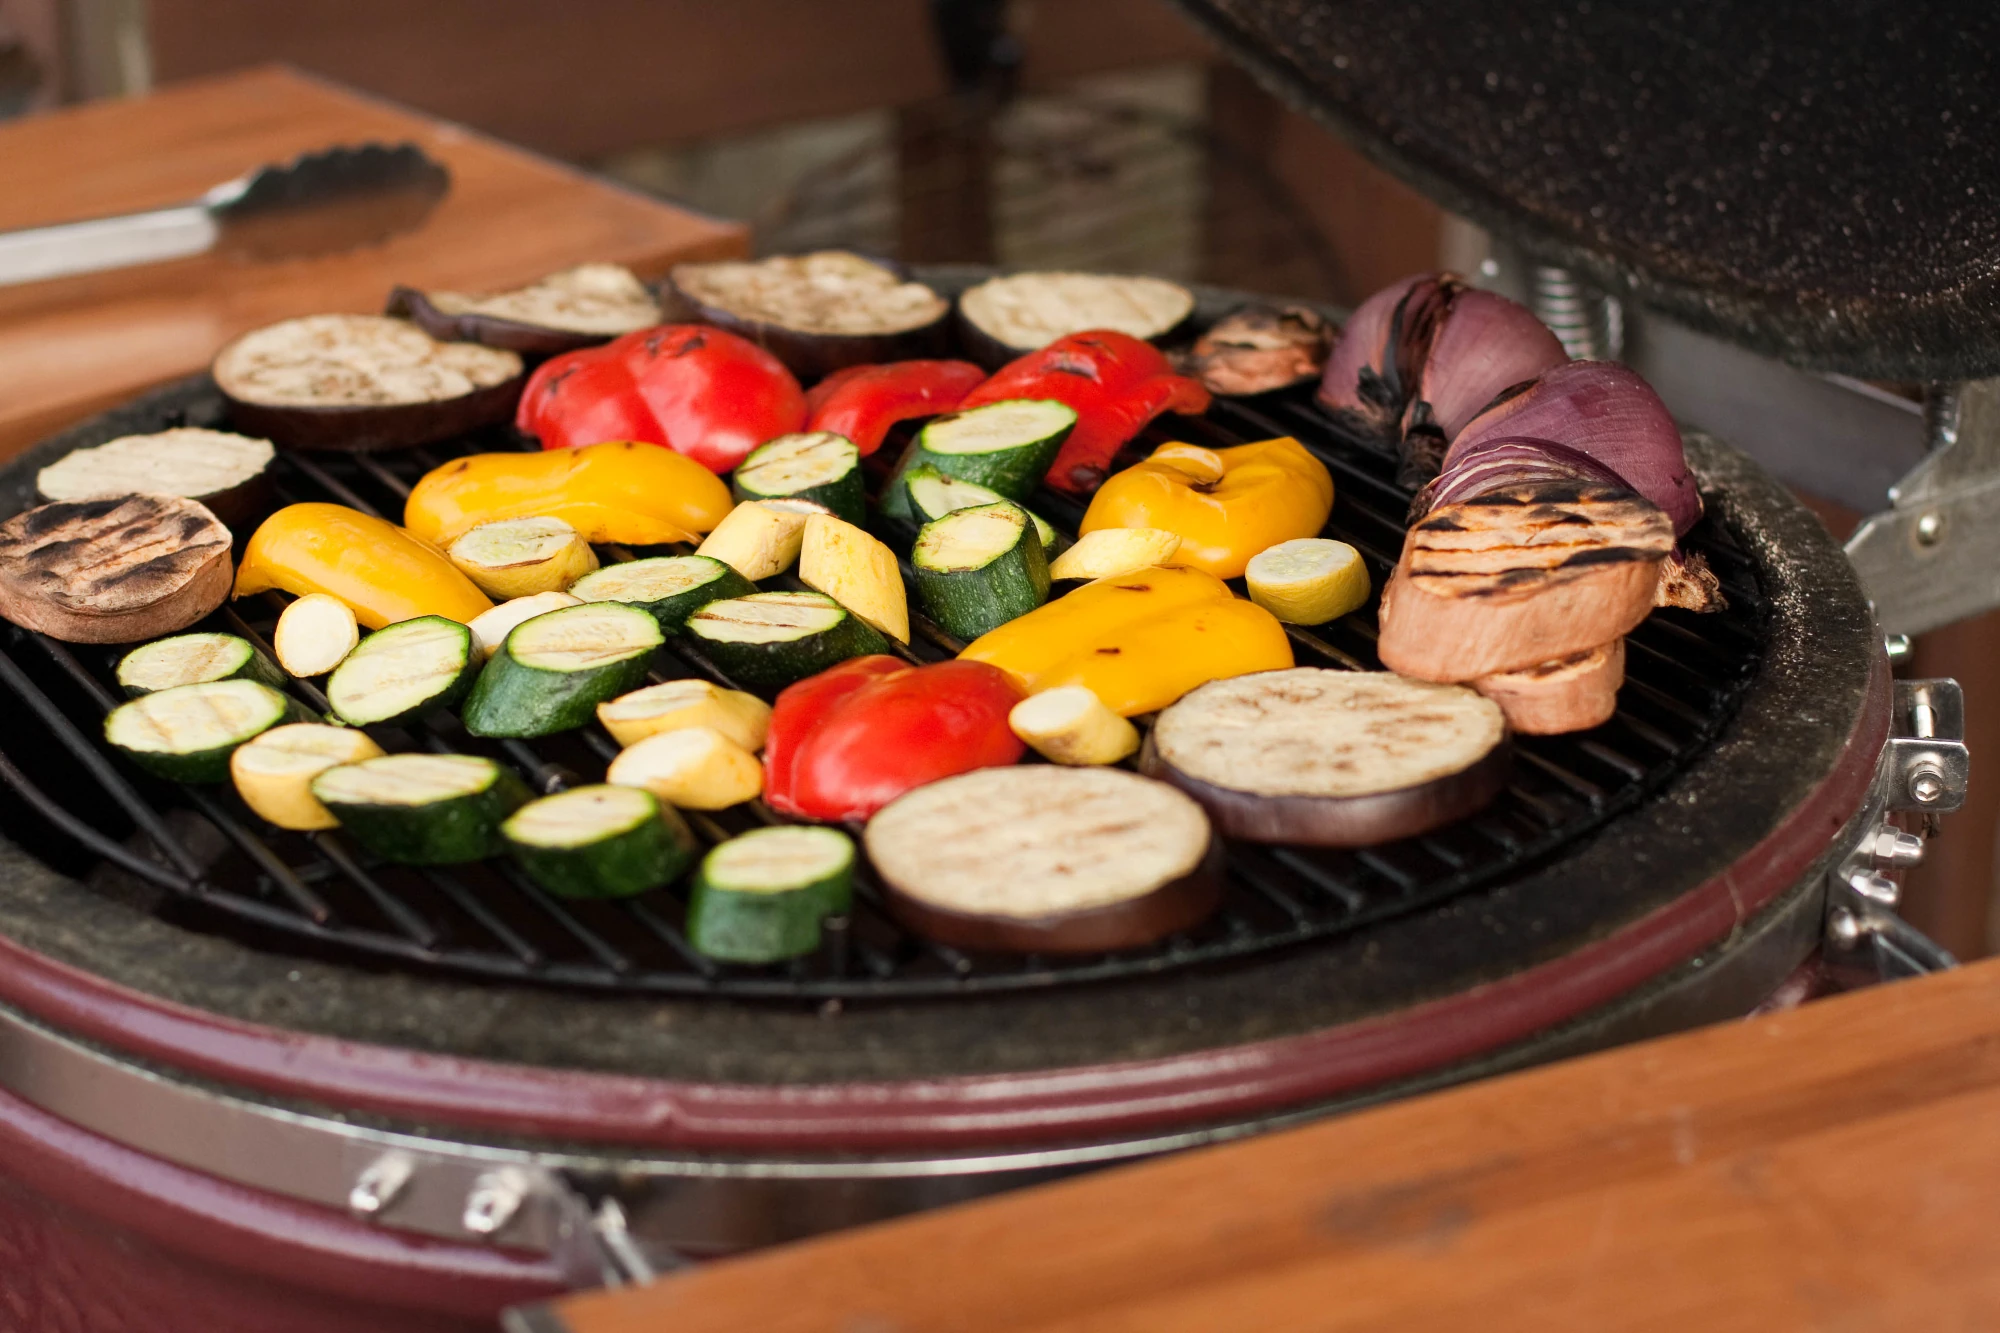 Zucchini, Squash, Sweet Potatoes, Onions, Bell Peppers, and Purple Vienna Seared on an Opened Kamado Grill